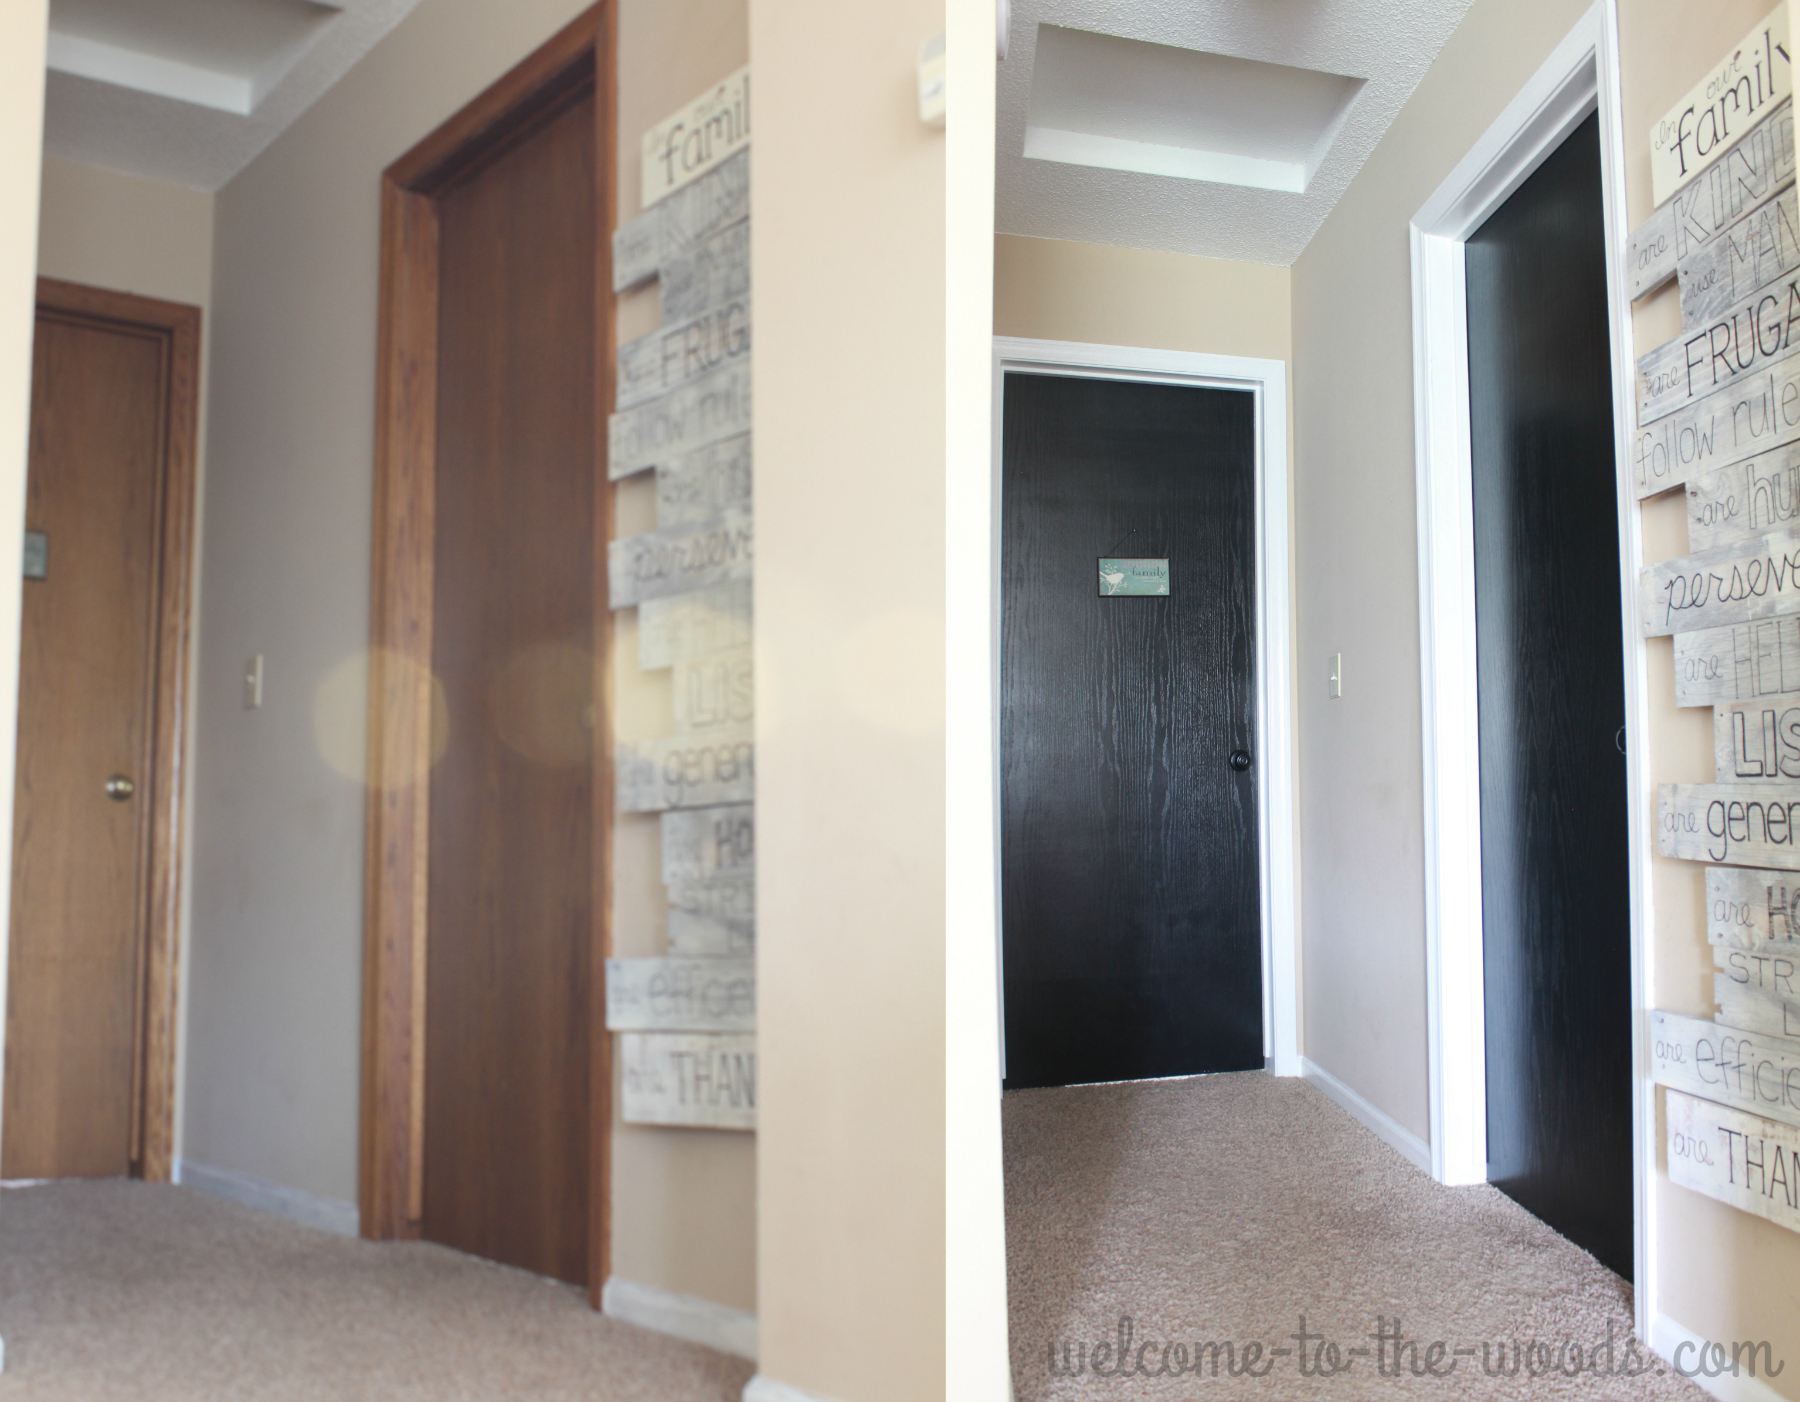 Interior trim painting ideas with white and black contrast for a modern decor. This hallway makeover before and after is amazing!